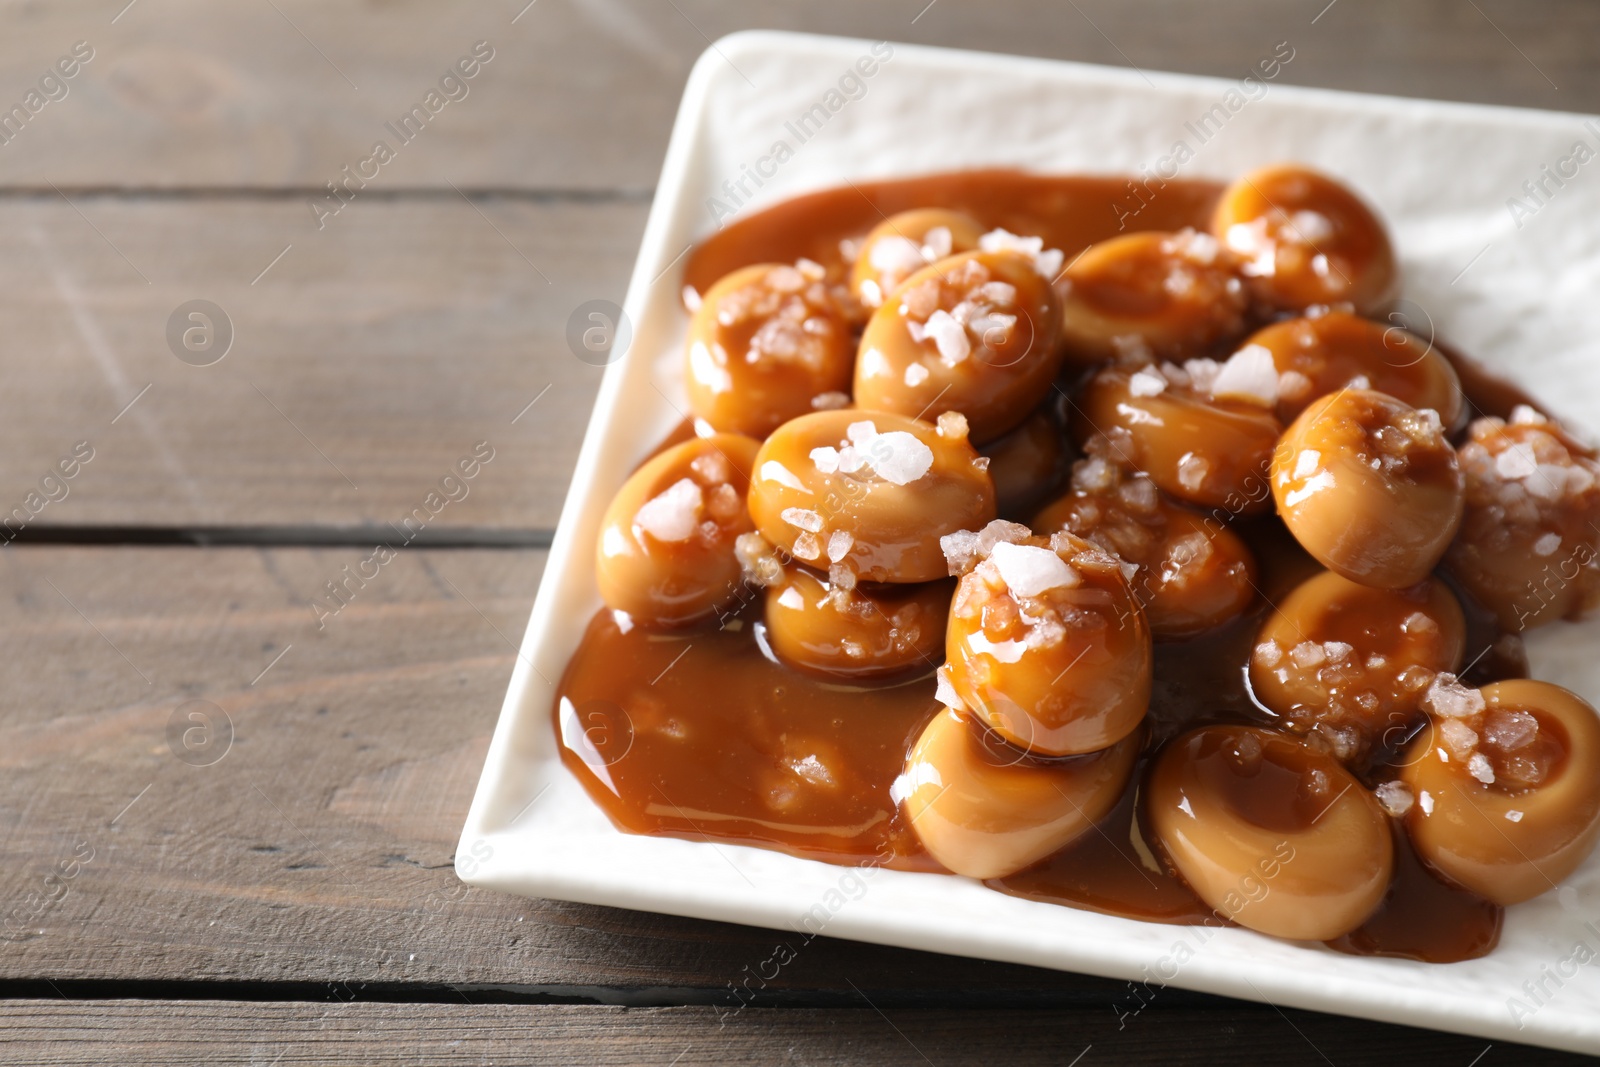 Photo of Plate with tasty candies, caramel sauce and salt on wooden table, closeup. Space for text